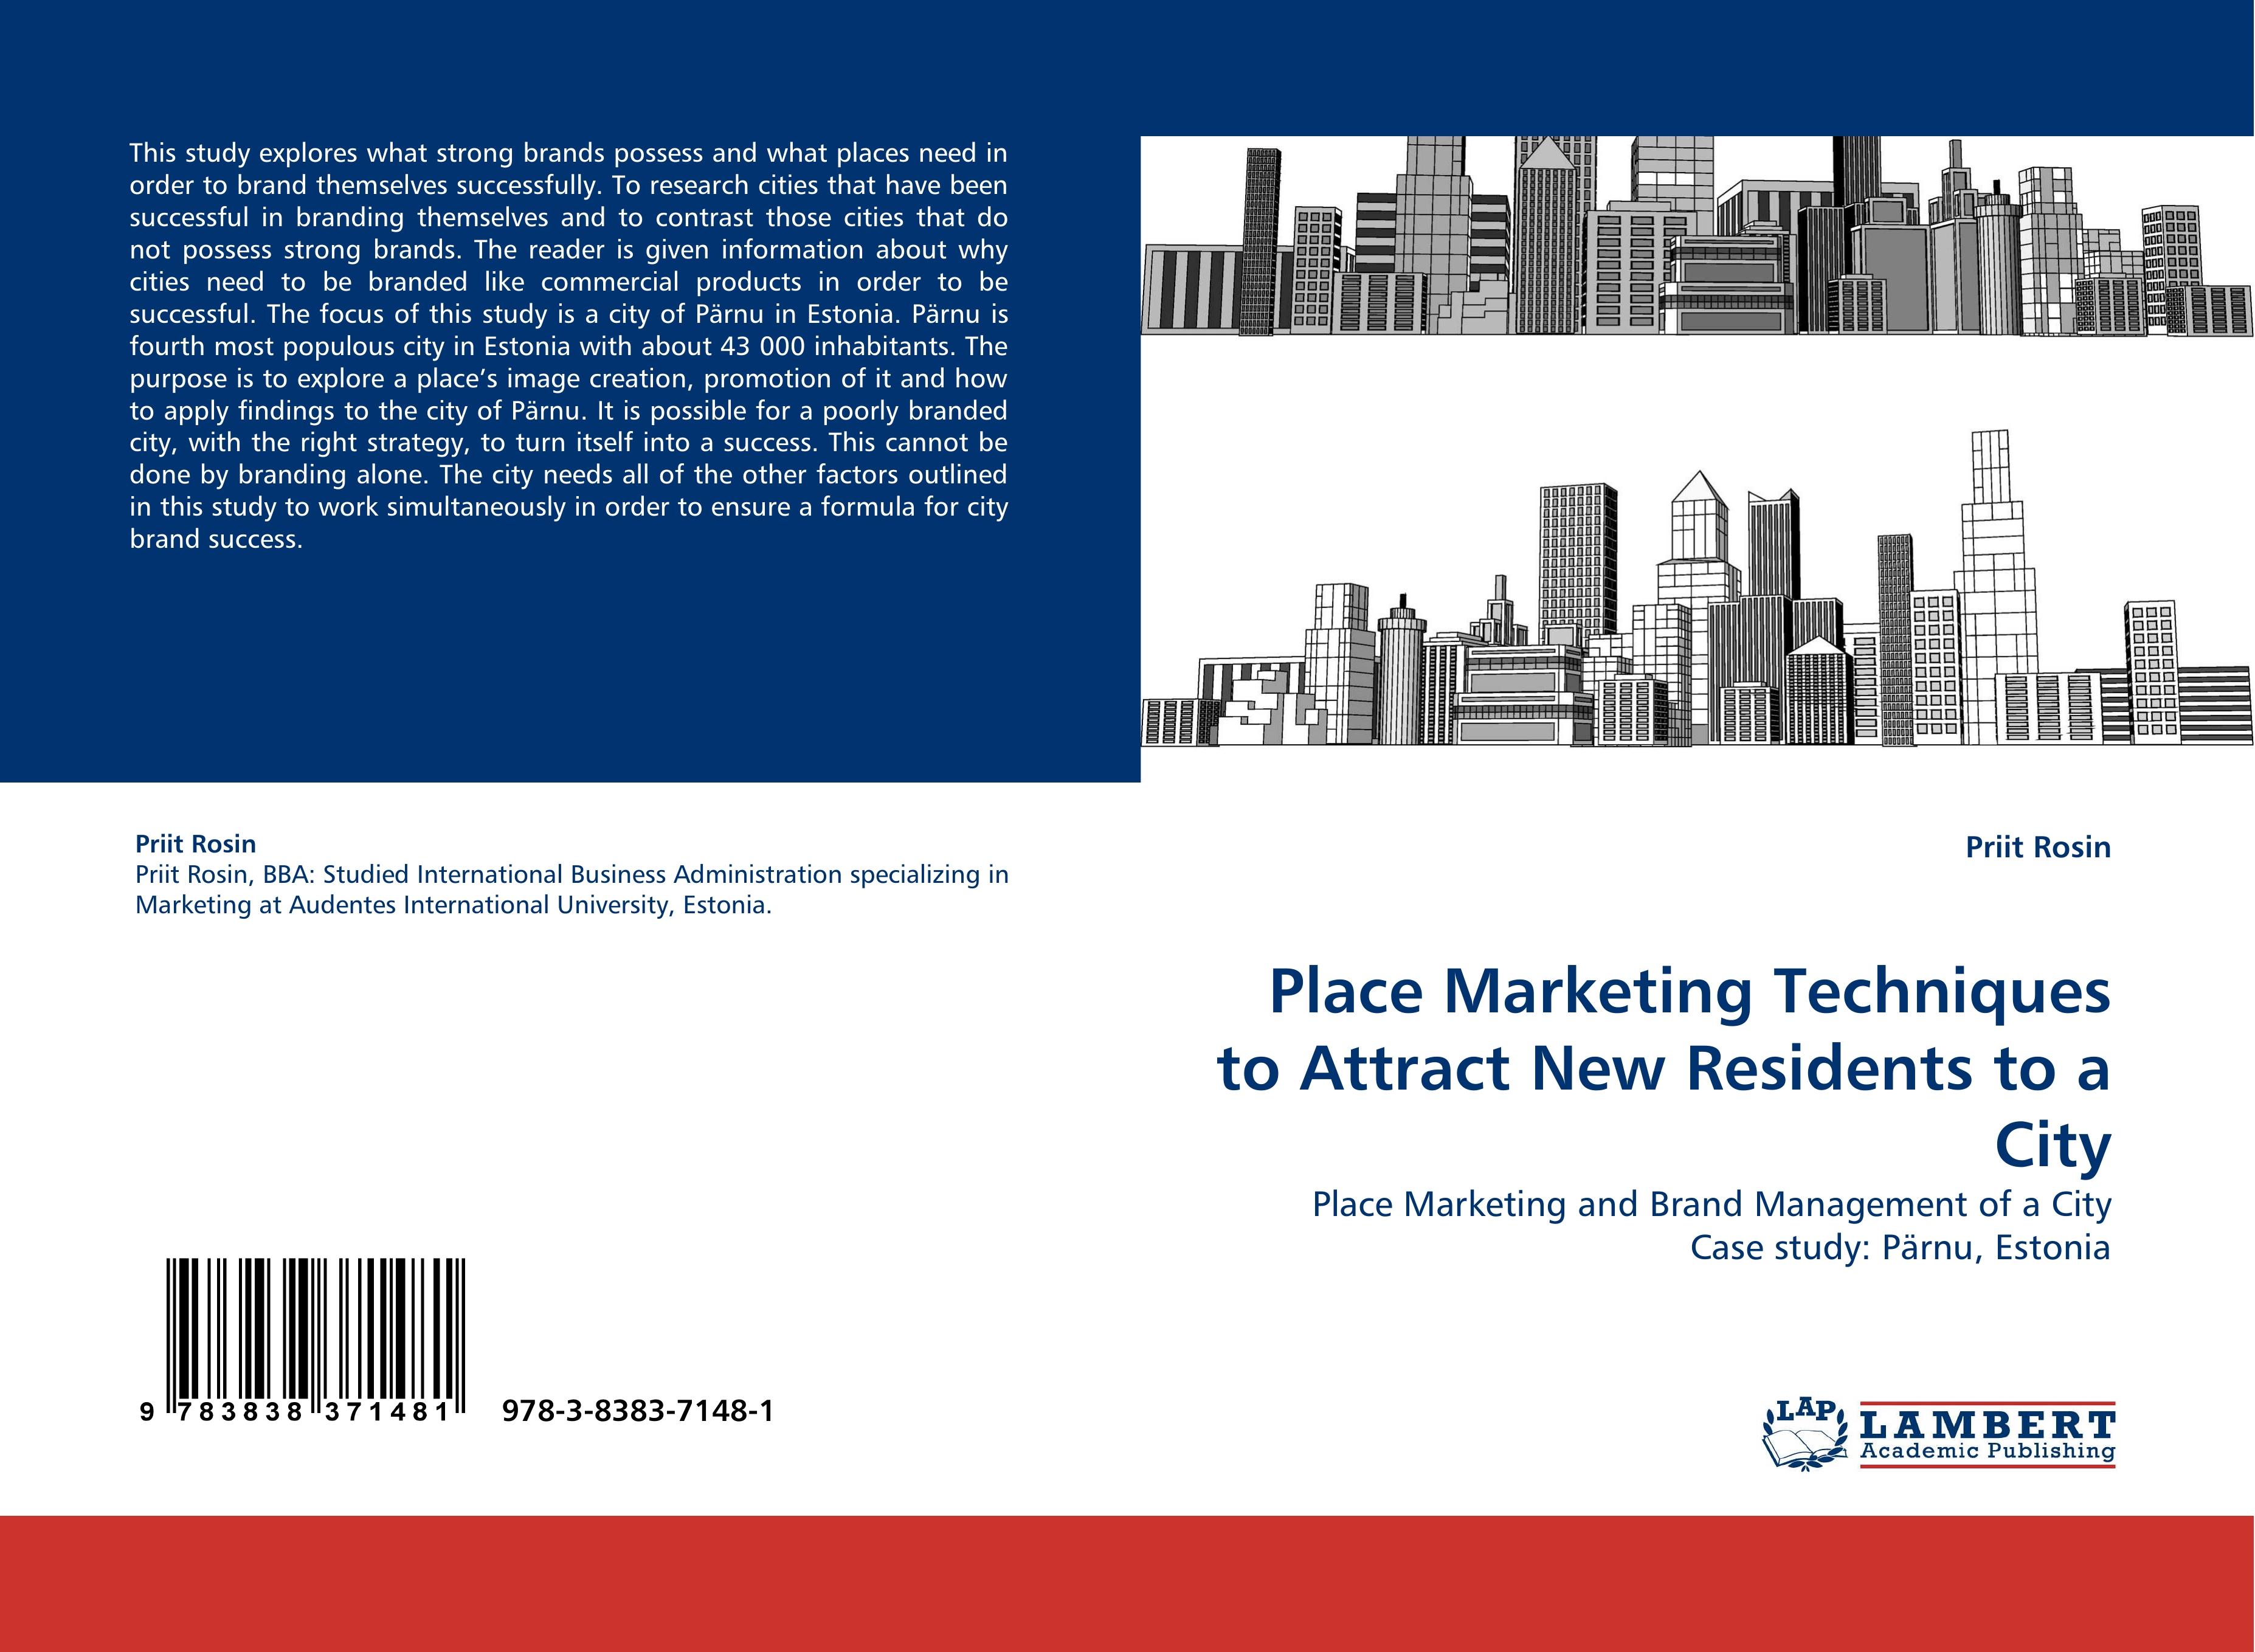 Place Marketing Techniques to Attract New Residents to a City / Place Marketing and Brand Management of a City Case study: Pärnu, Estonia / Priit Rosin / Taschenbuch / Paperback / 64 S. / Englisch - Rosin, Priit